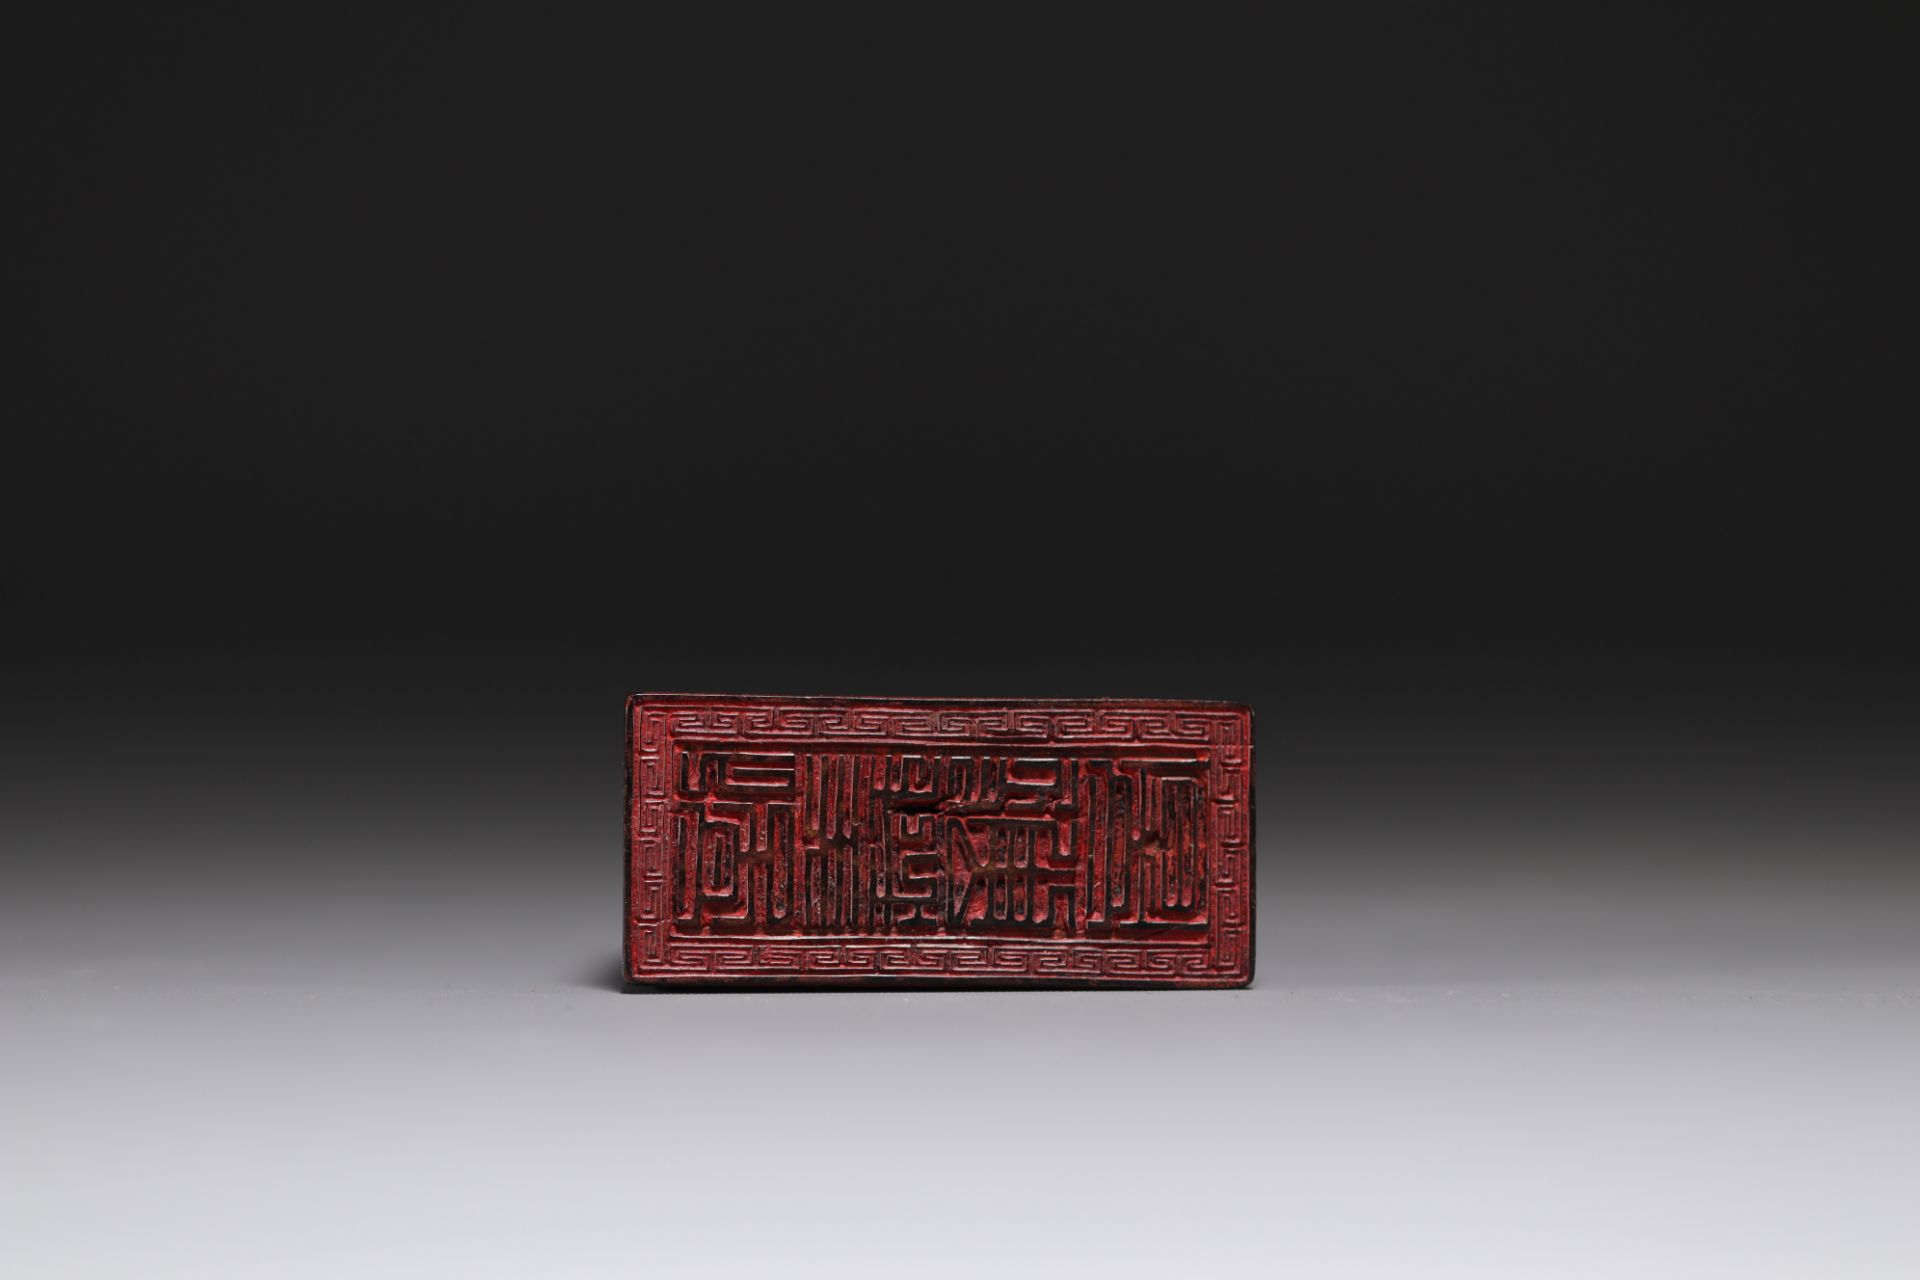 China - Horn seal, signed on the upper part, Ming period.